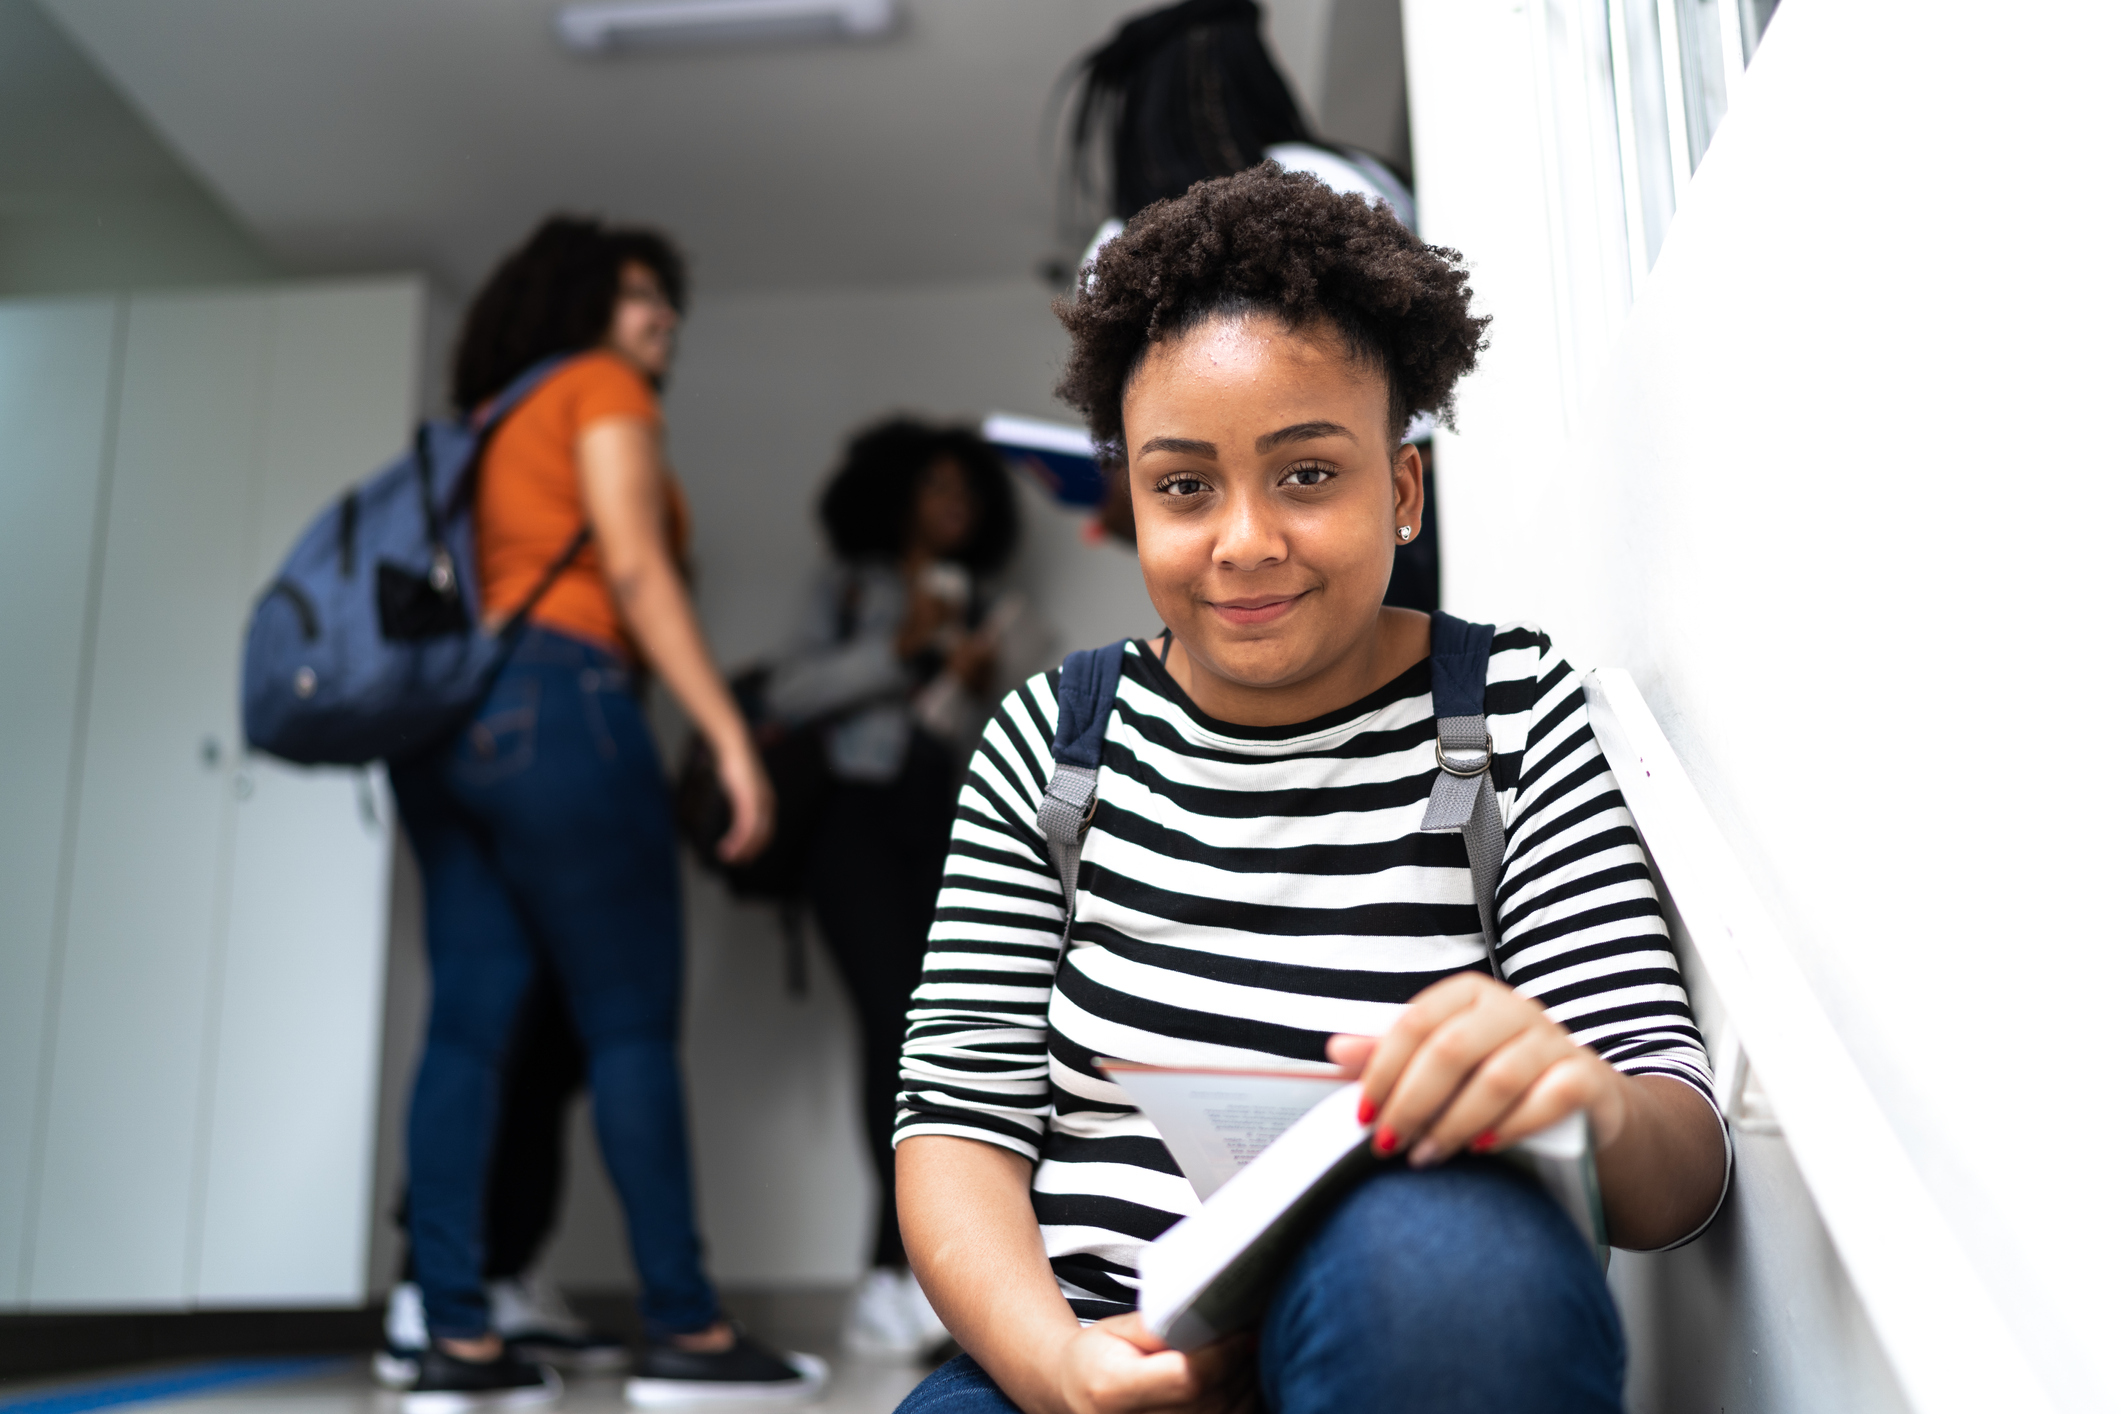 the photo shows a young girl with short afro hair, who is wearing a rucksack and sitting at the top of the school stairs holding a book and smiling straight at the camera